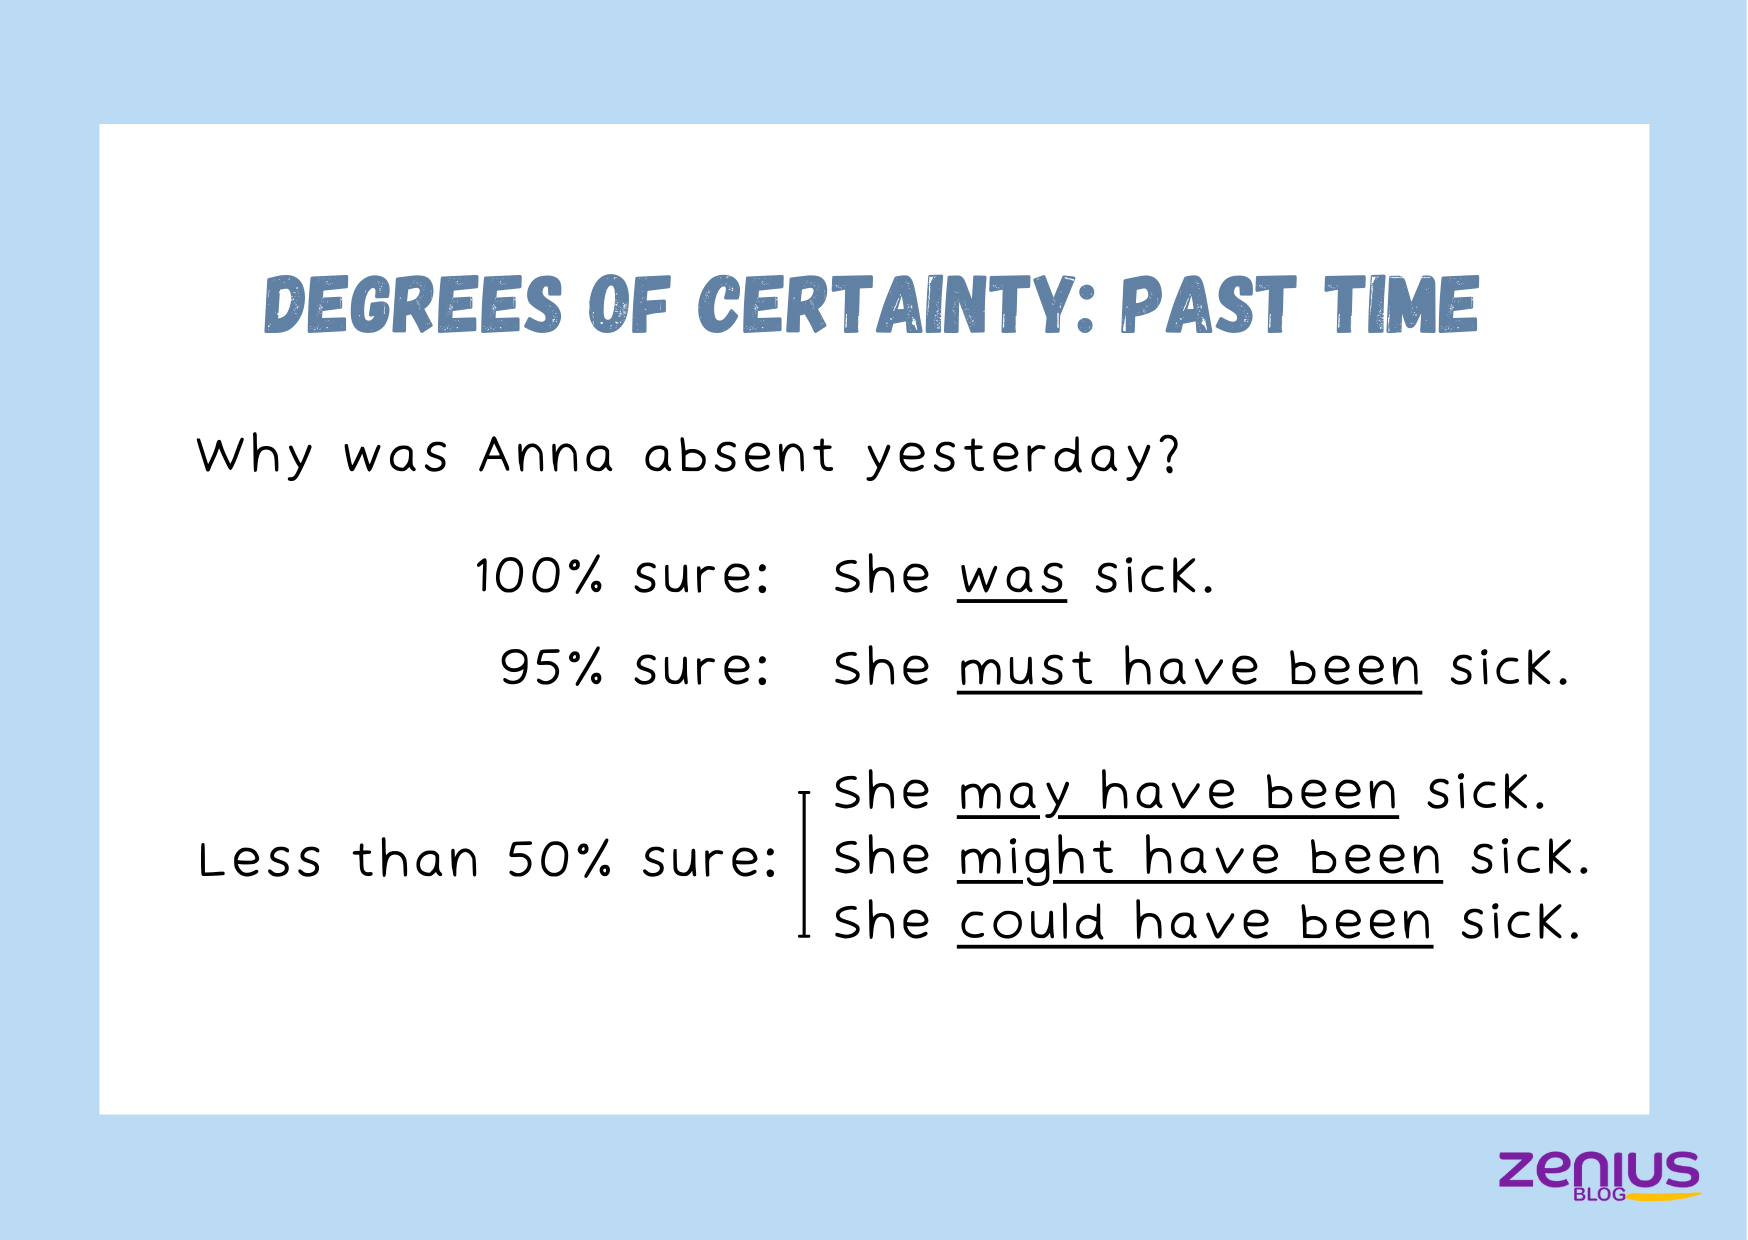 Making Prediction Degrees of Certainty Past Time Zenius